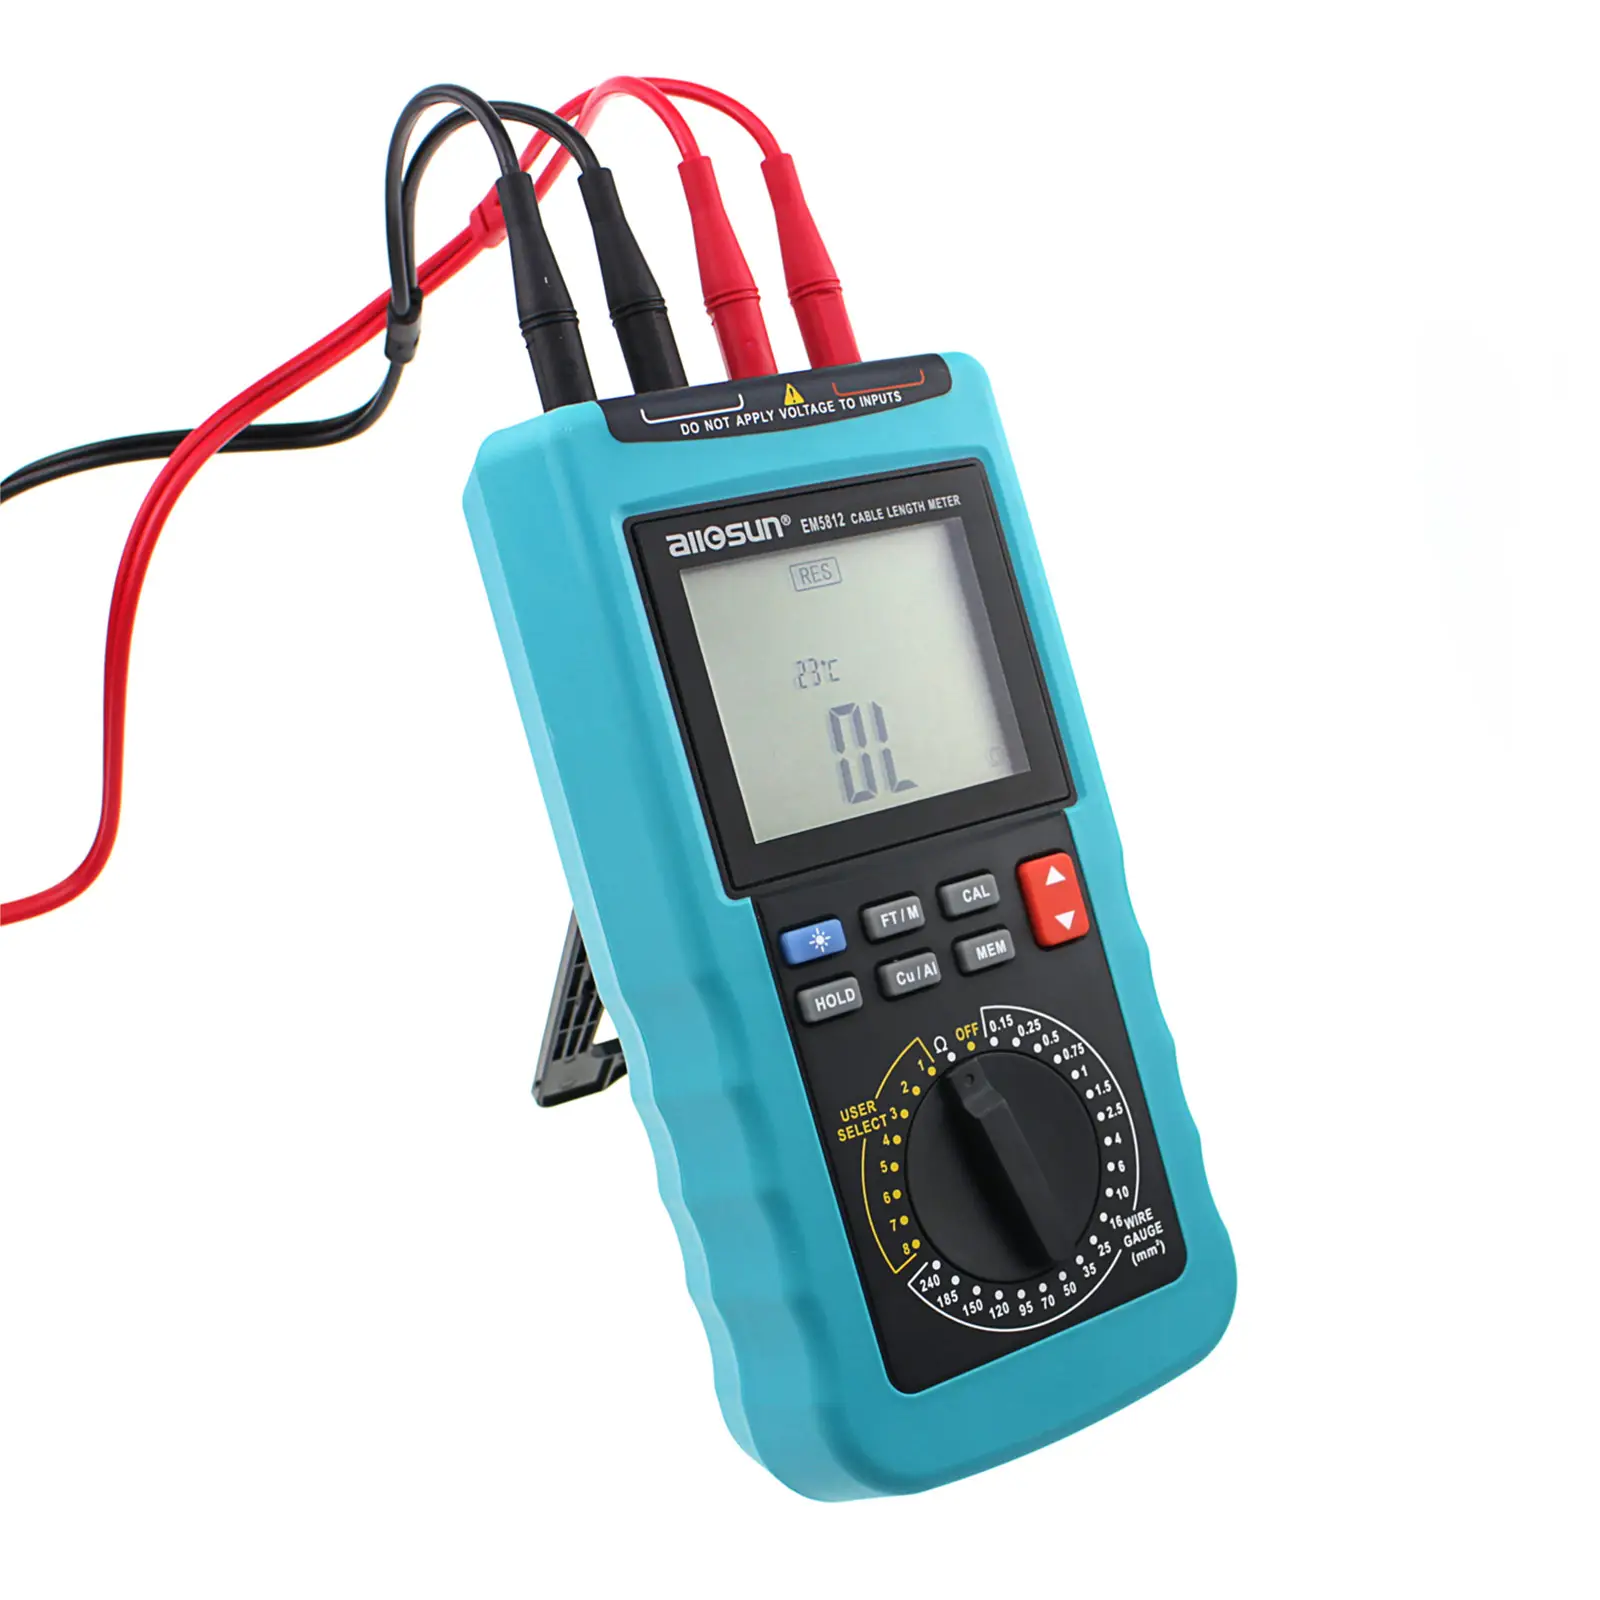 Allosun EM5812 cable length meter Digital Cable Resistance Tester 30KM/100000ft Wire Cable Length Tester Meter